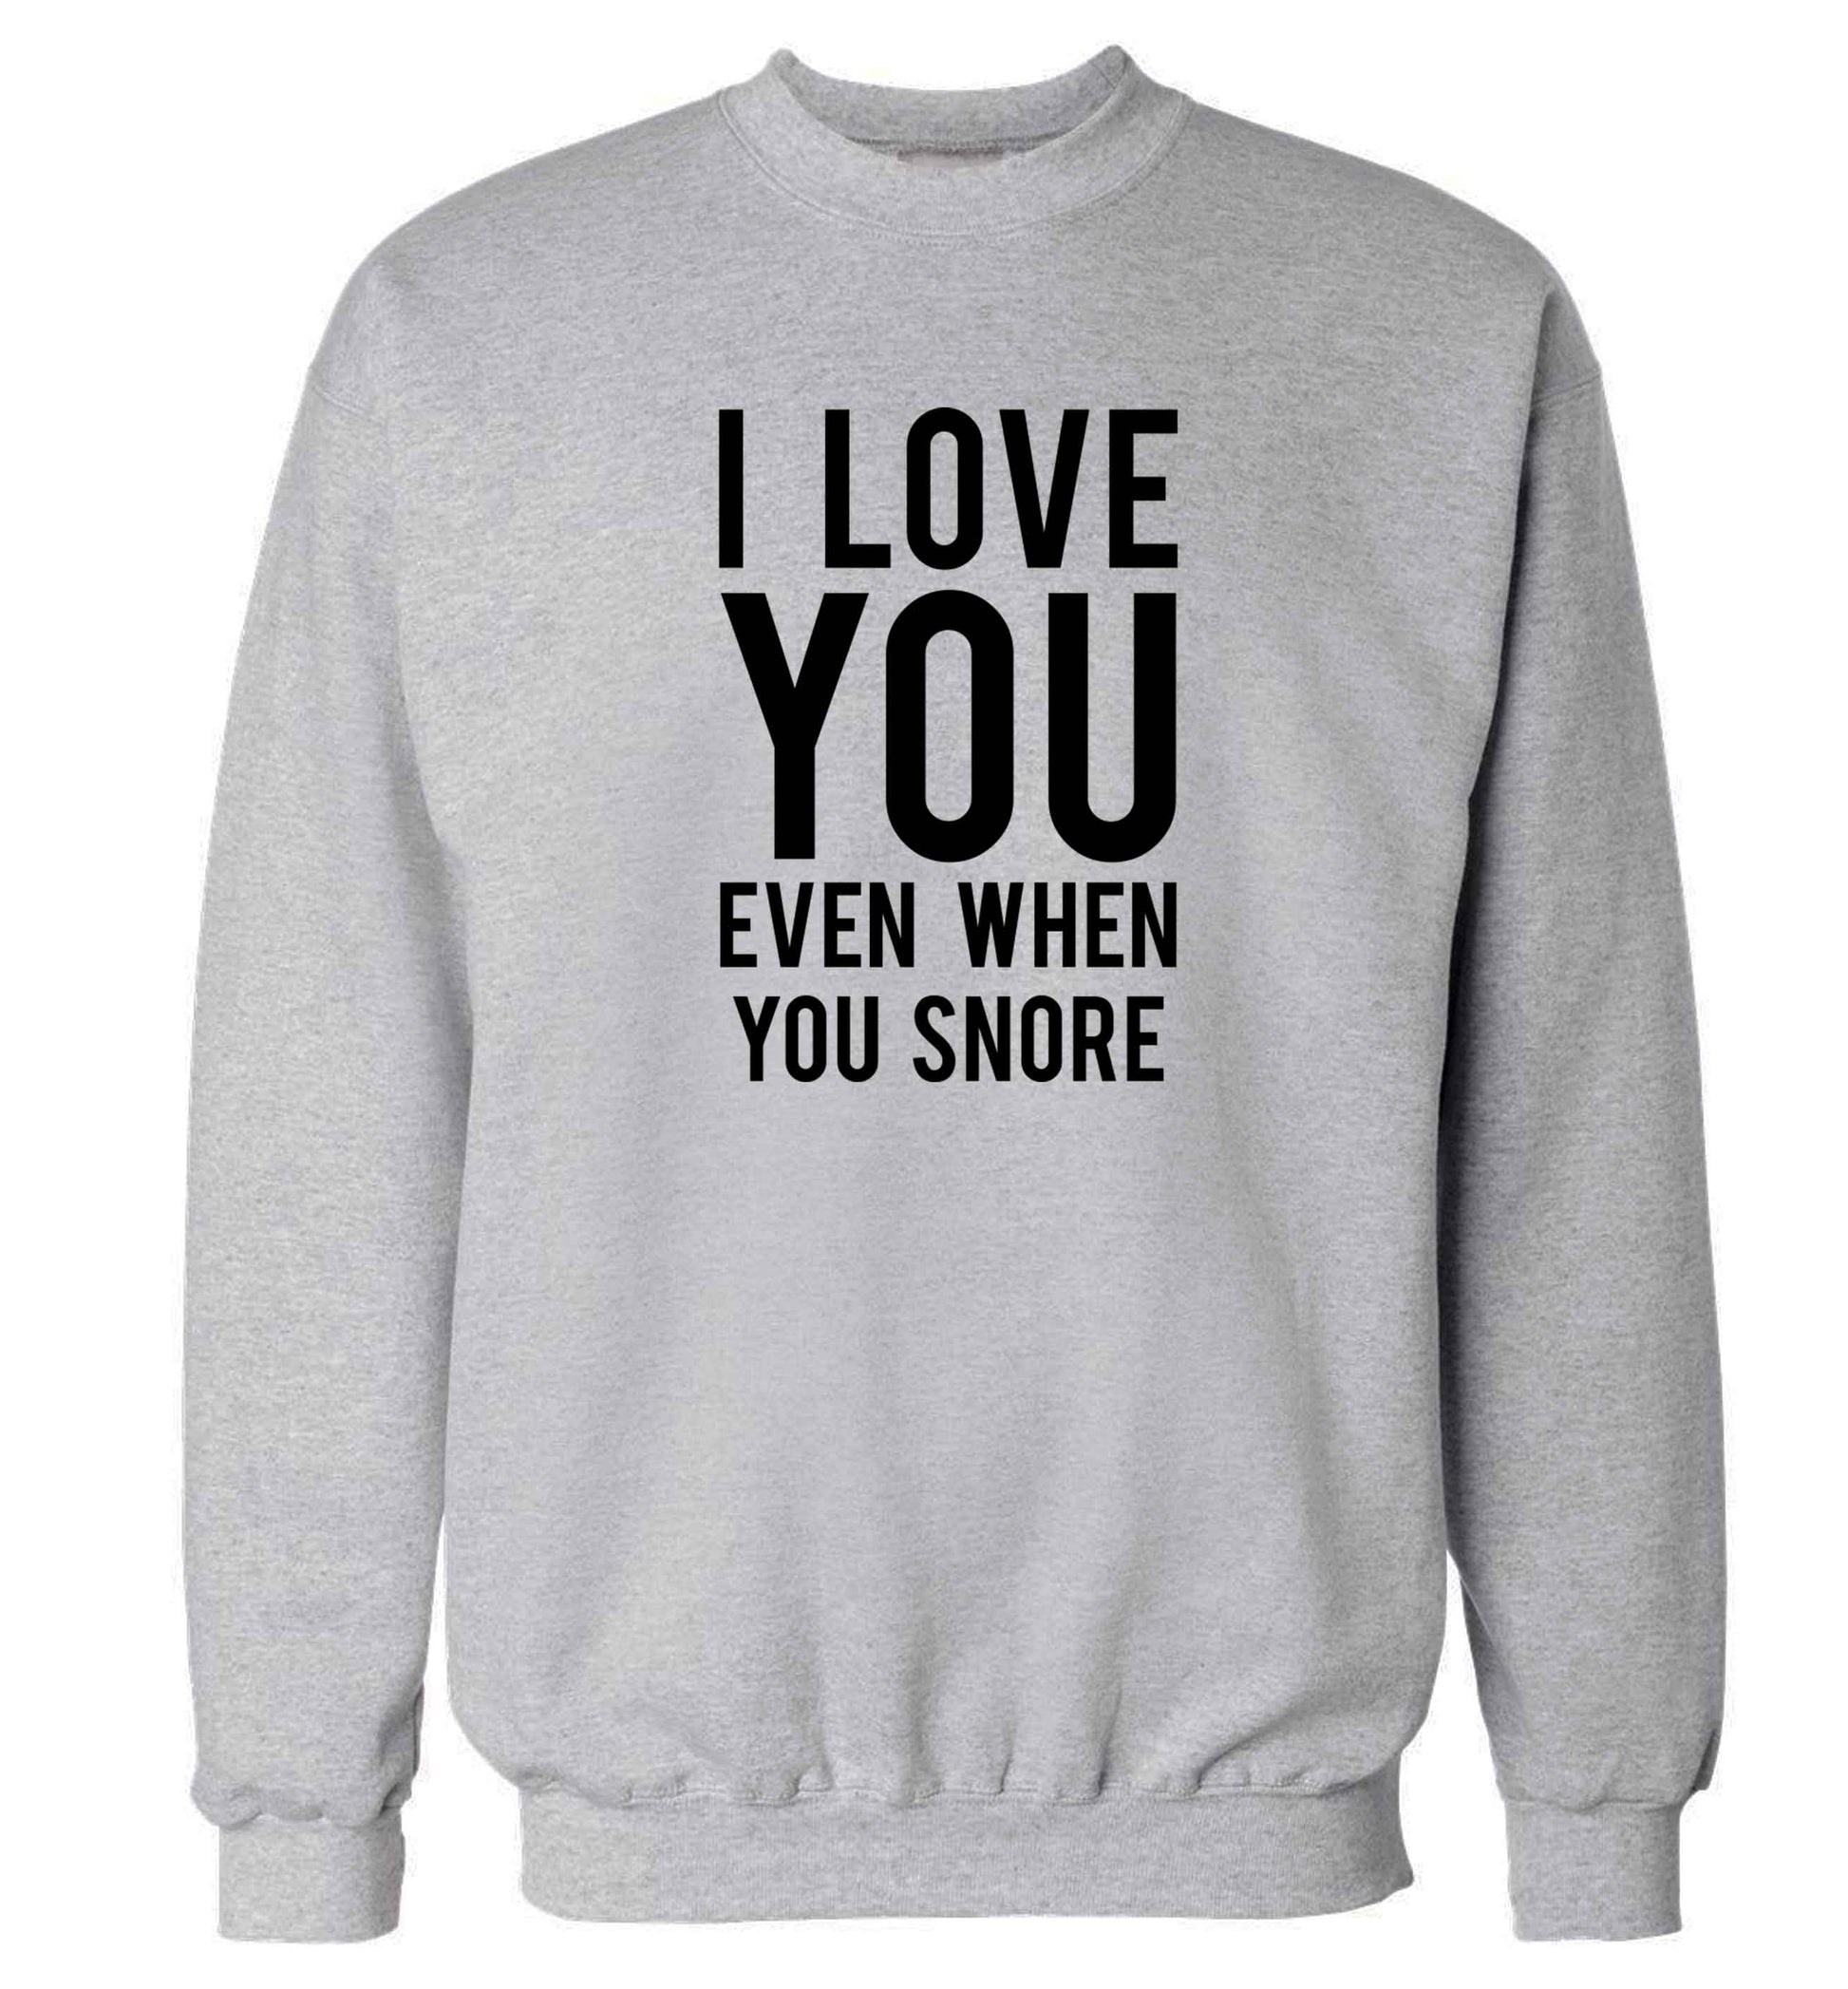 I love you even when you snore adult's unisex grey sweater 2XL